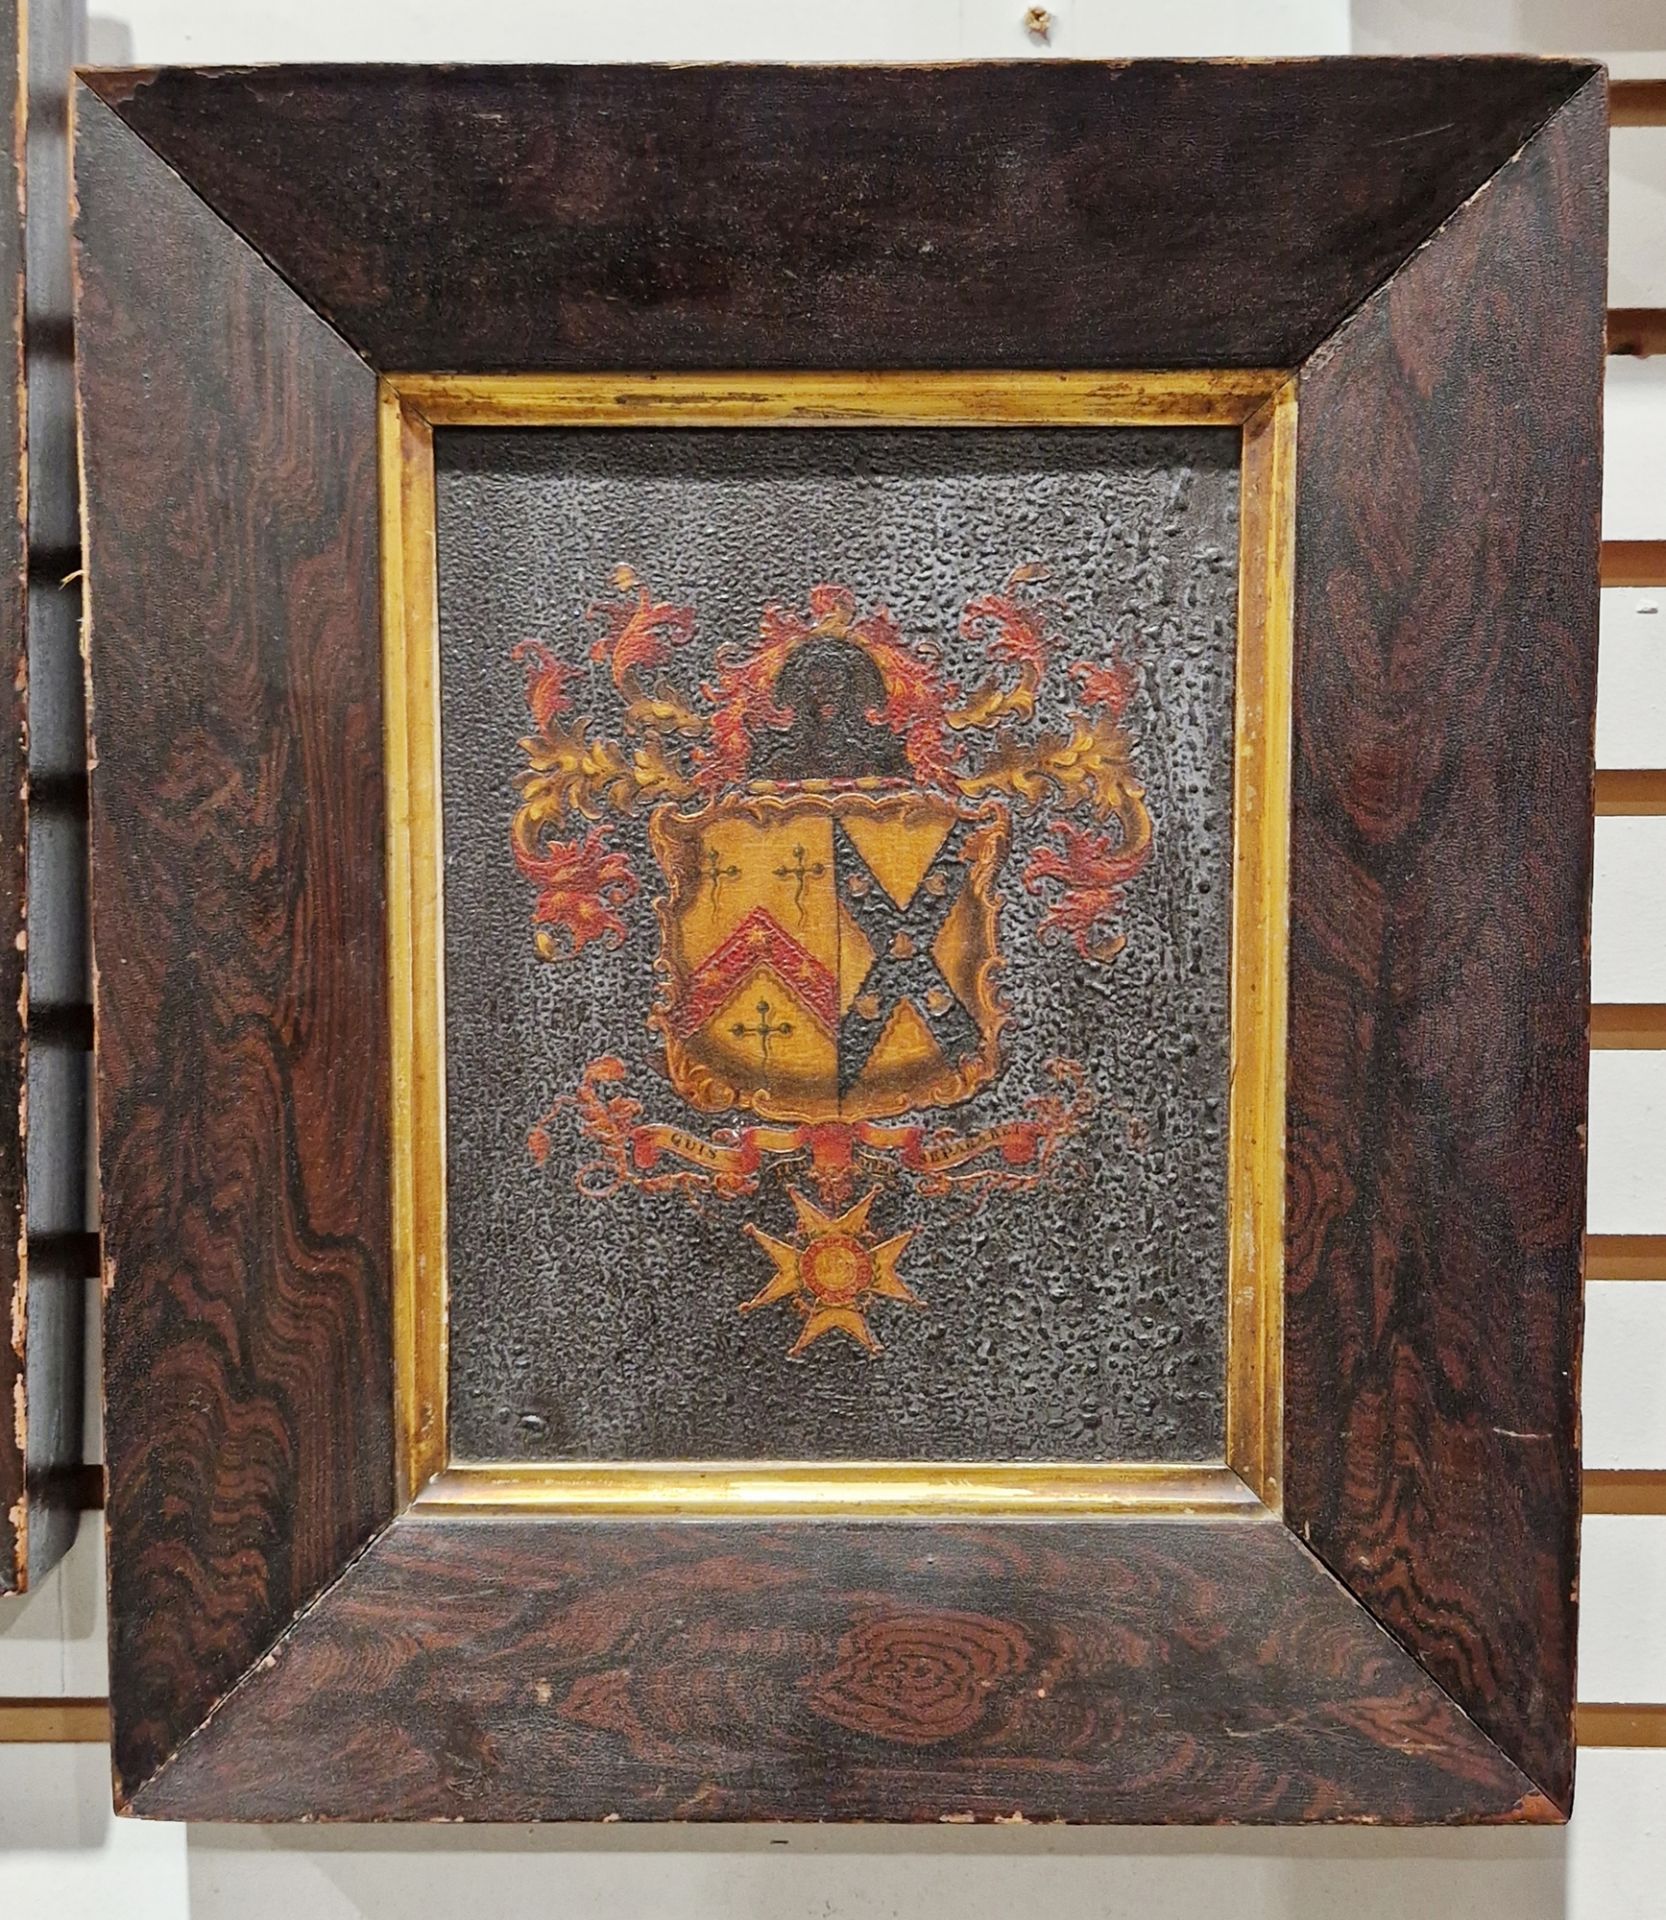 Two 19th century framed painted coaching armorial panels, each with coat of arms swagged or